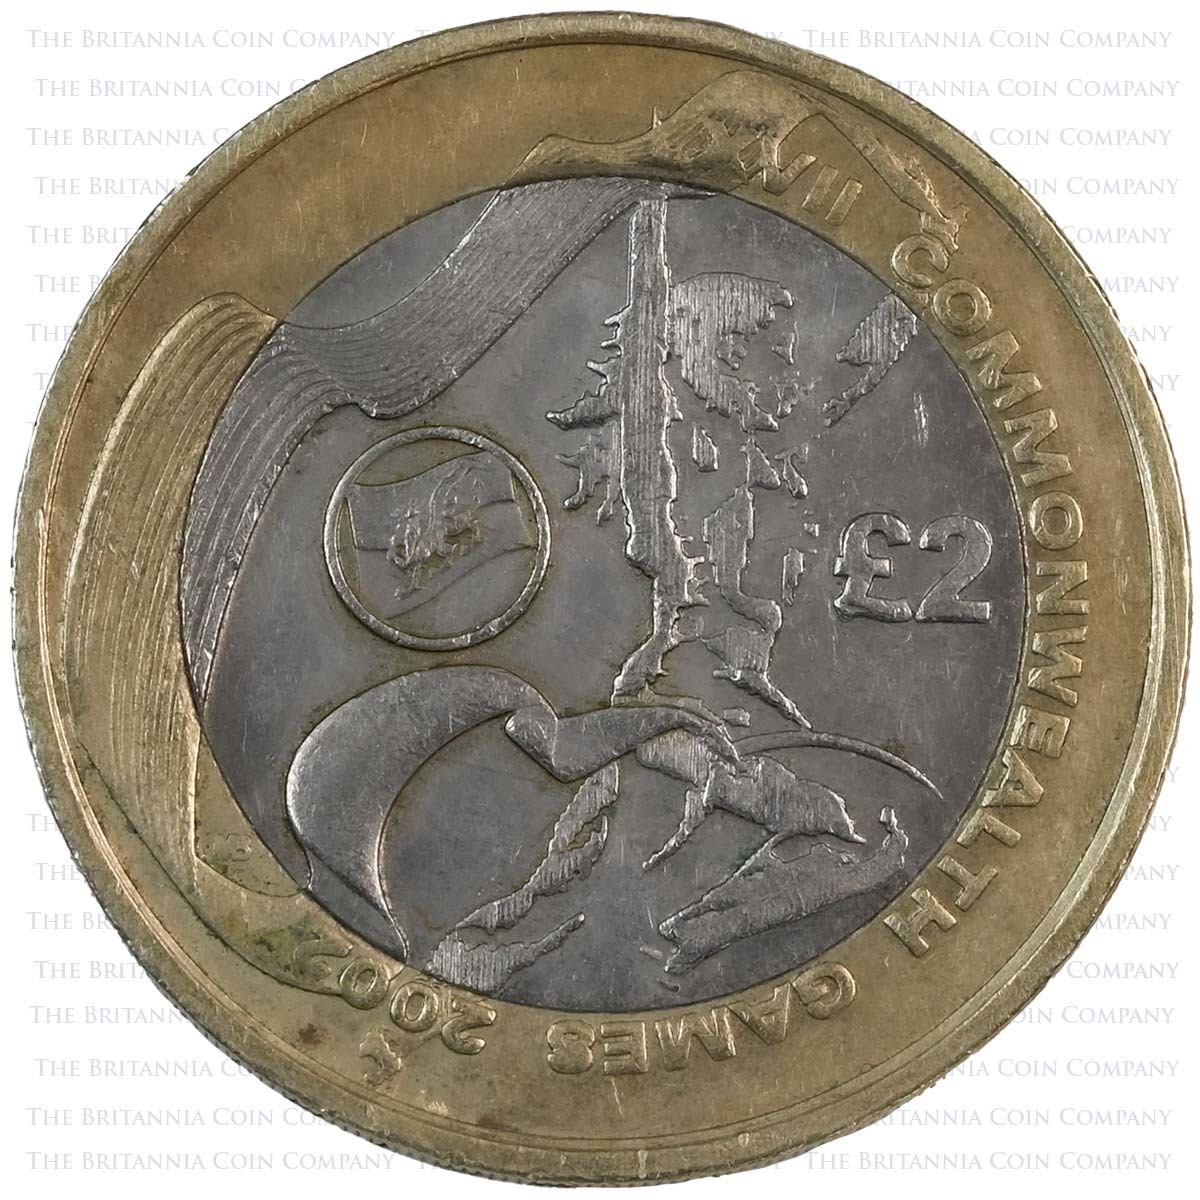 2002 Wales Commonwealth Games Circulated Two Pound Coin Reverse